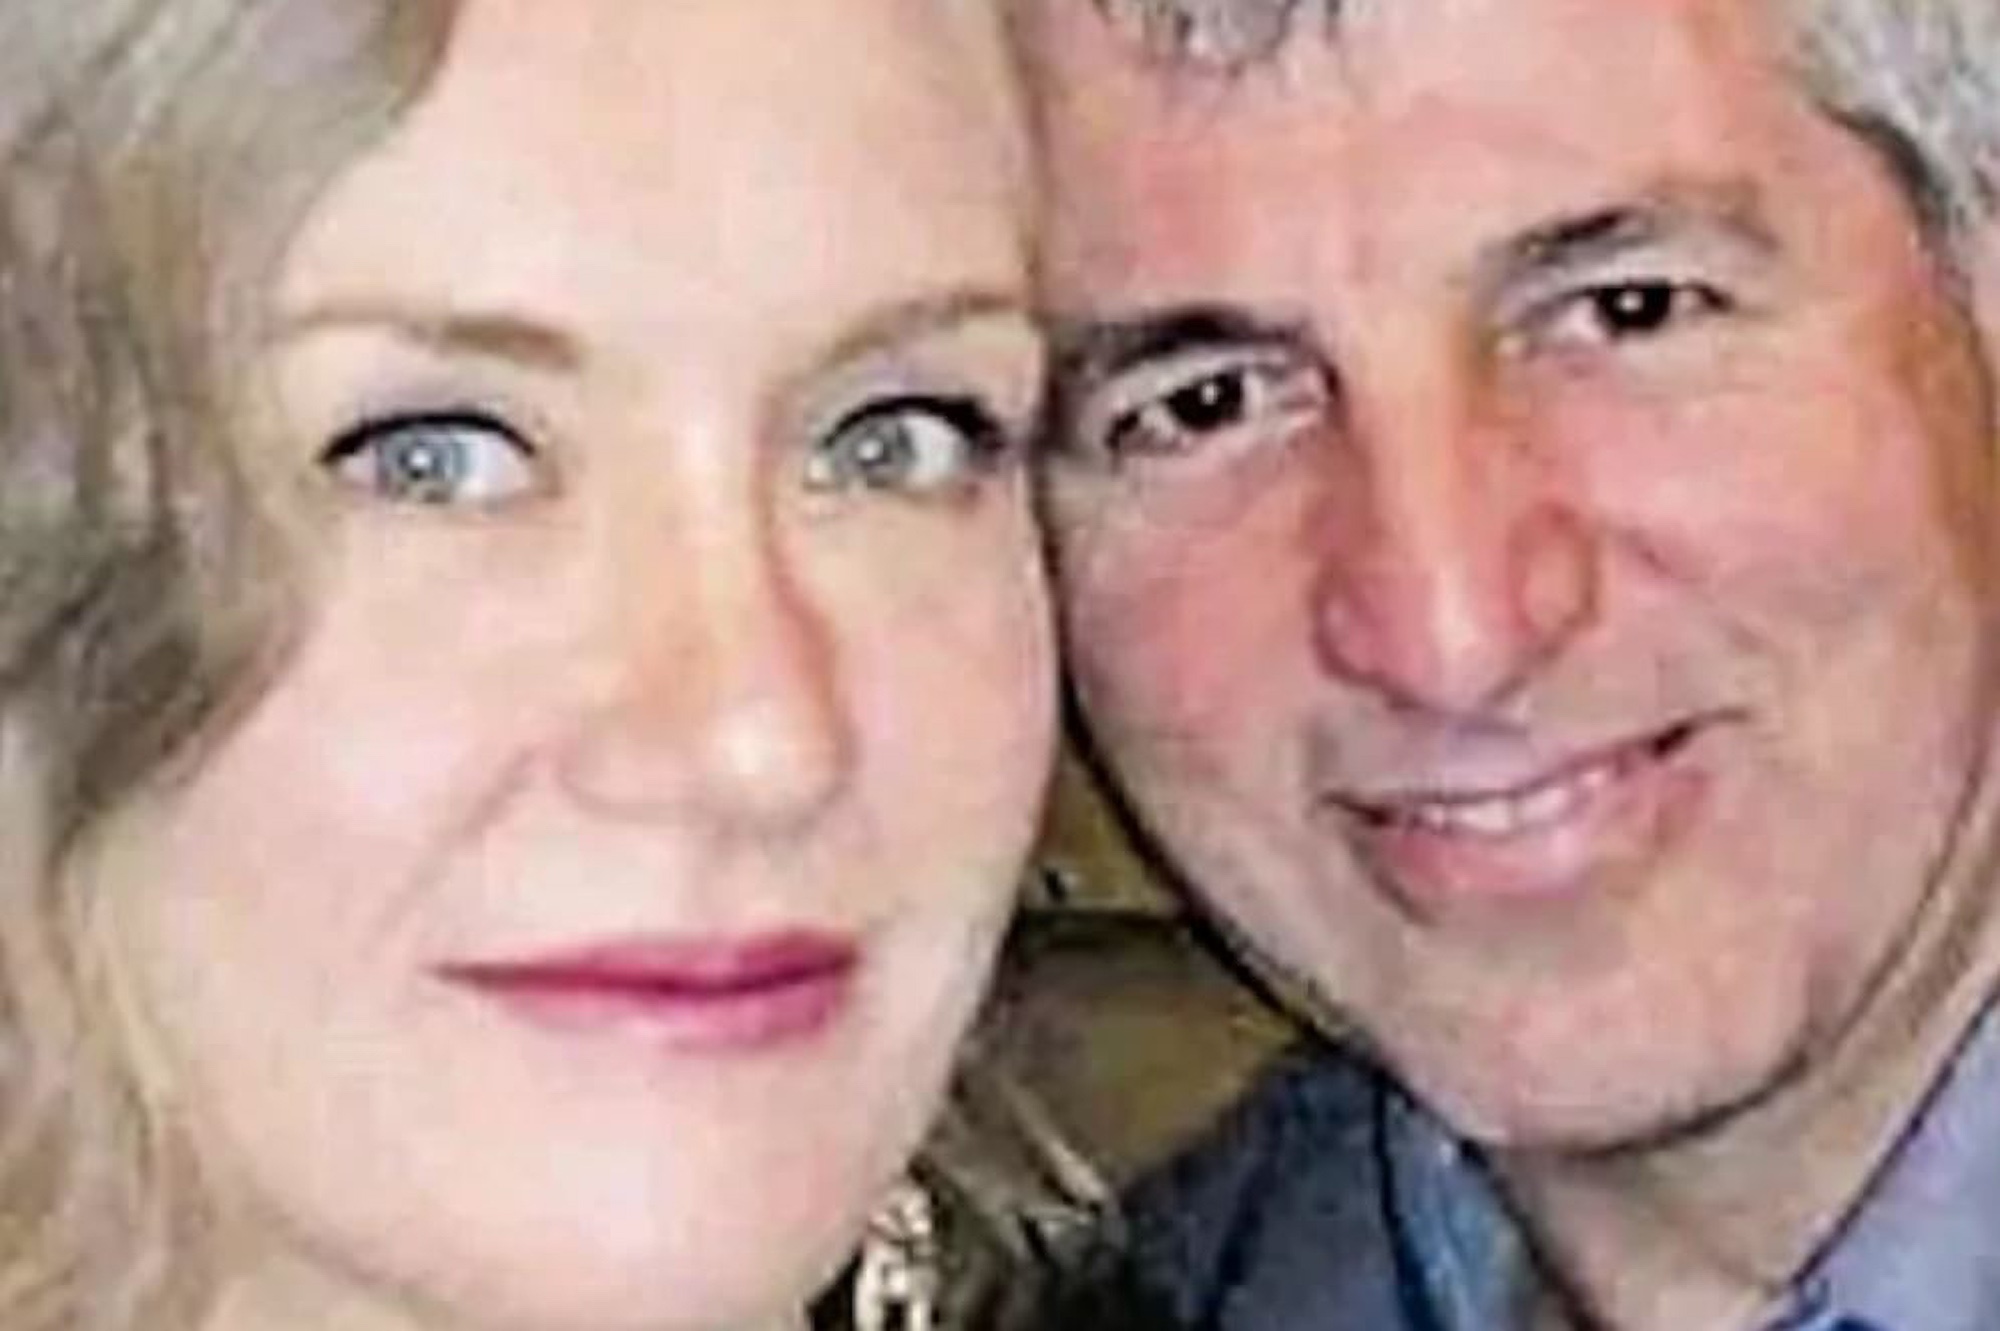 Read more about the article American Busted After Murdering Wife On Pricey Trip Around Europe Sparking International Manhunt